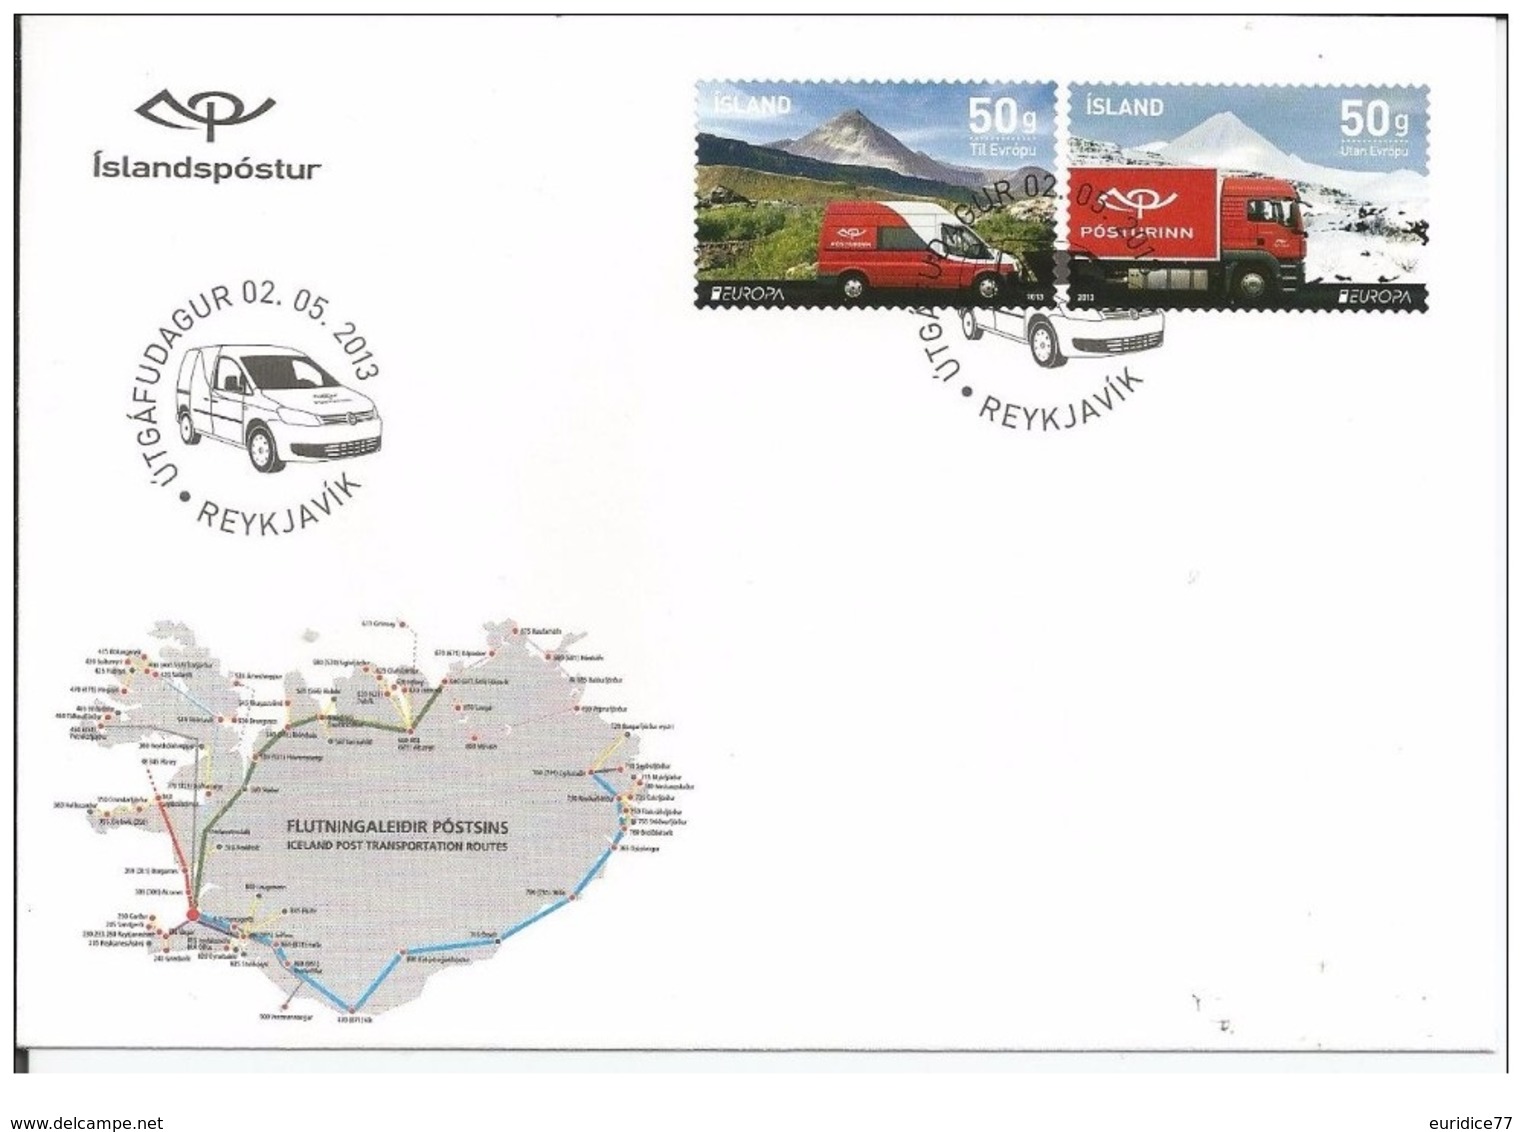 Iceland 2013 - Europa C.E.P.T. Postal Vehicles FDC - First Day Cover - 2013